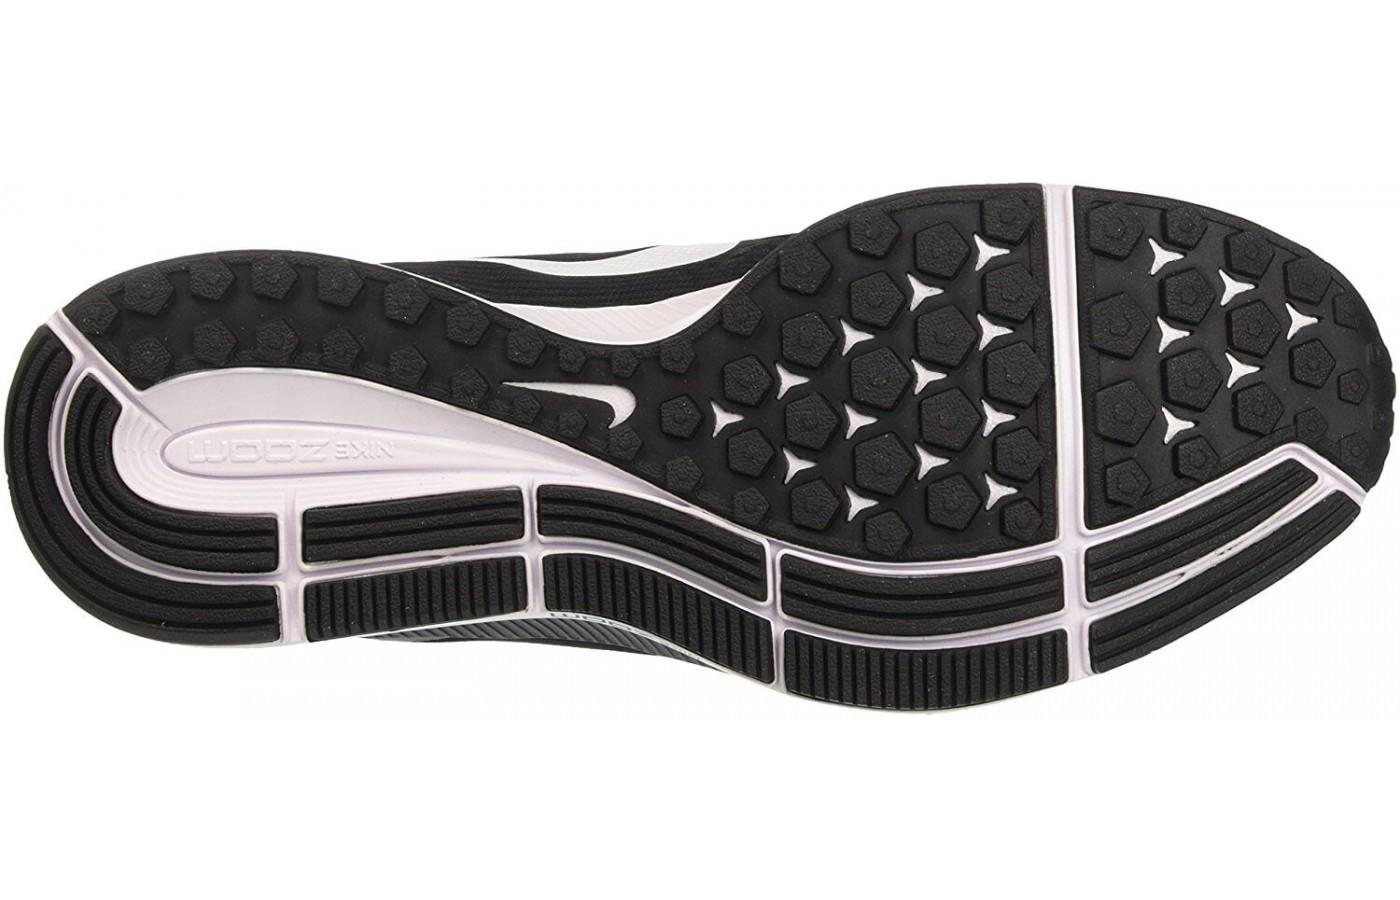 the outsole of the Nike Air Zoom Pegasus 34 features excellent tread on the medial and numerous flex grooves